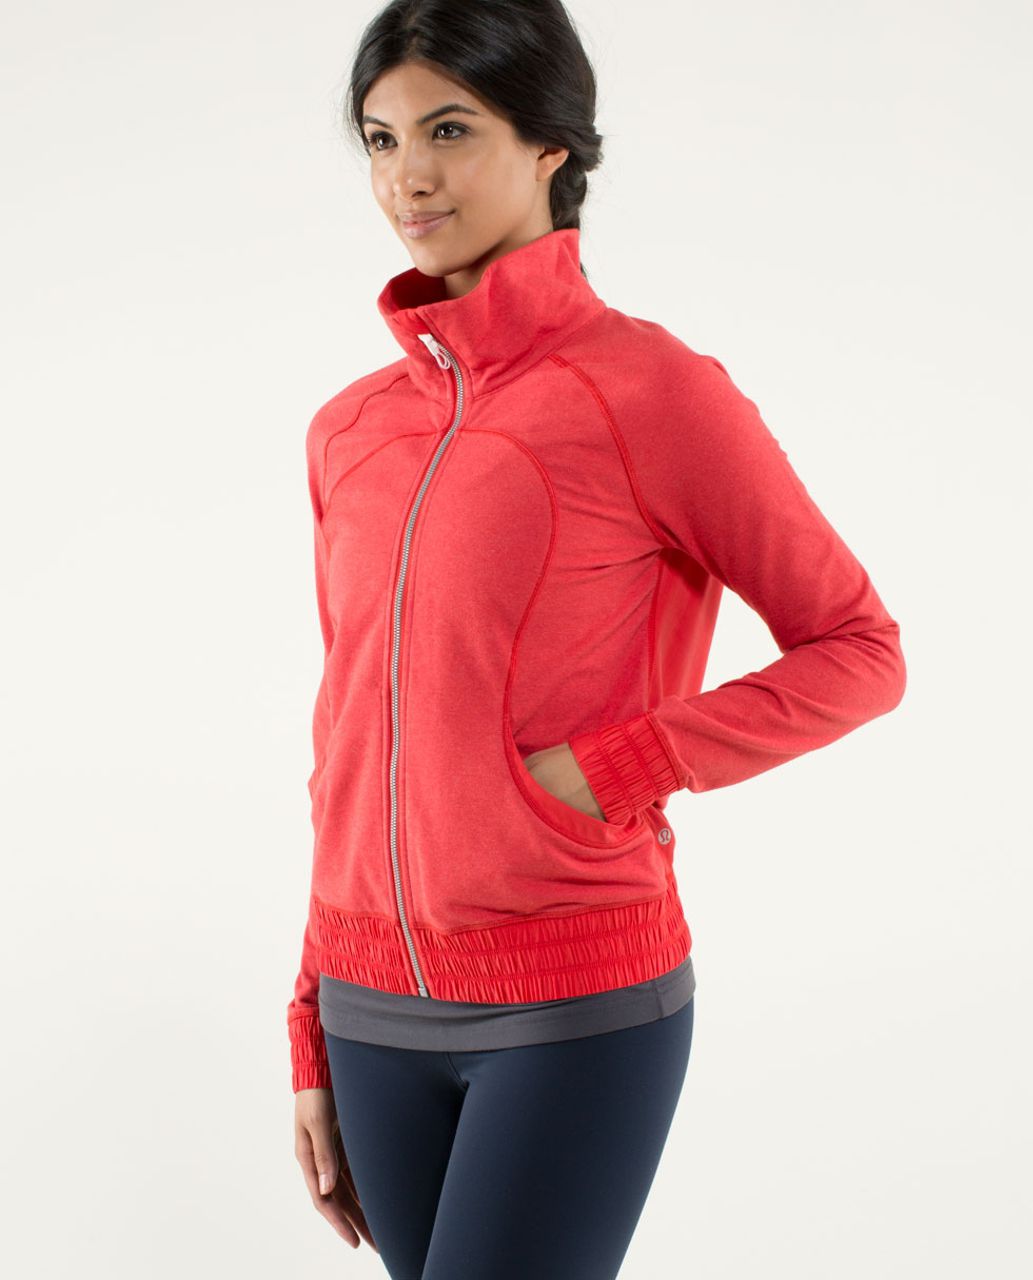 Lululemon Blissed Out Jacket - Love Red